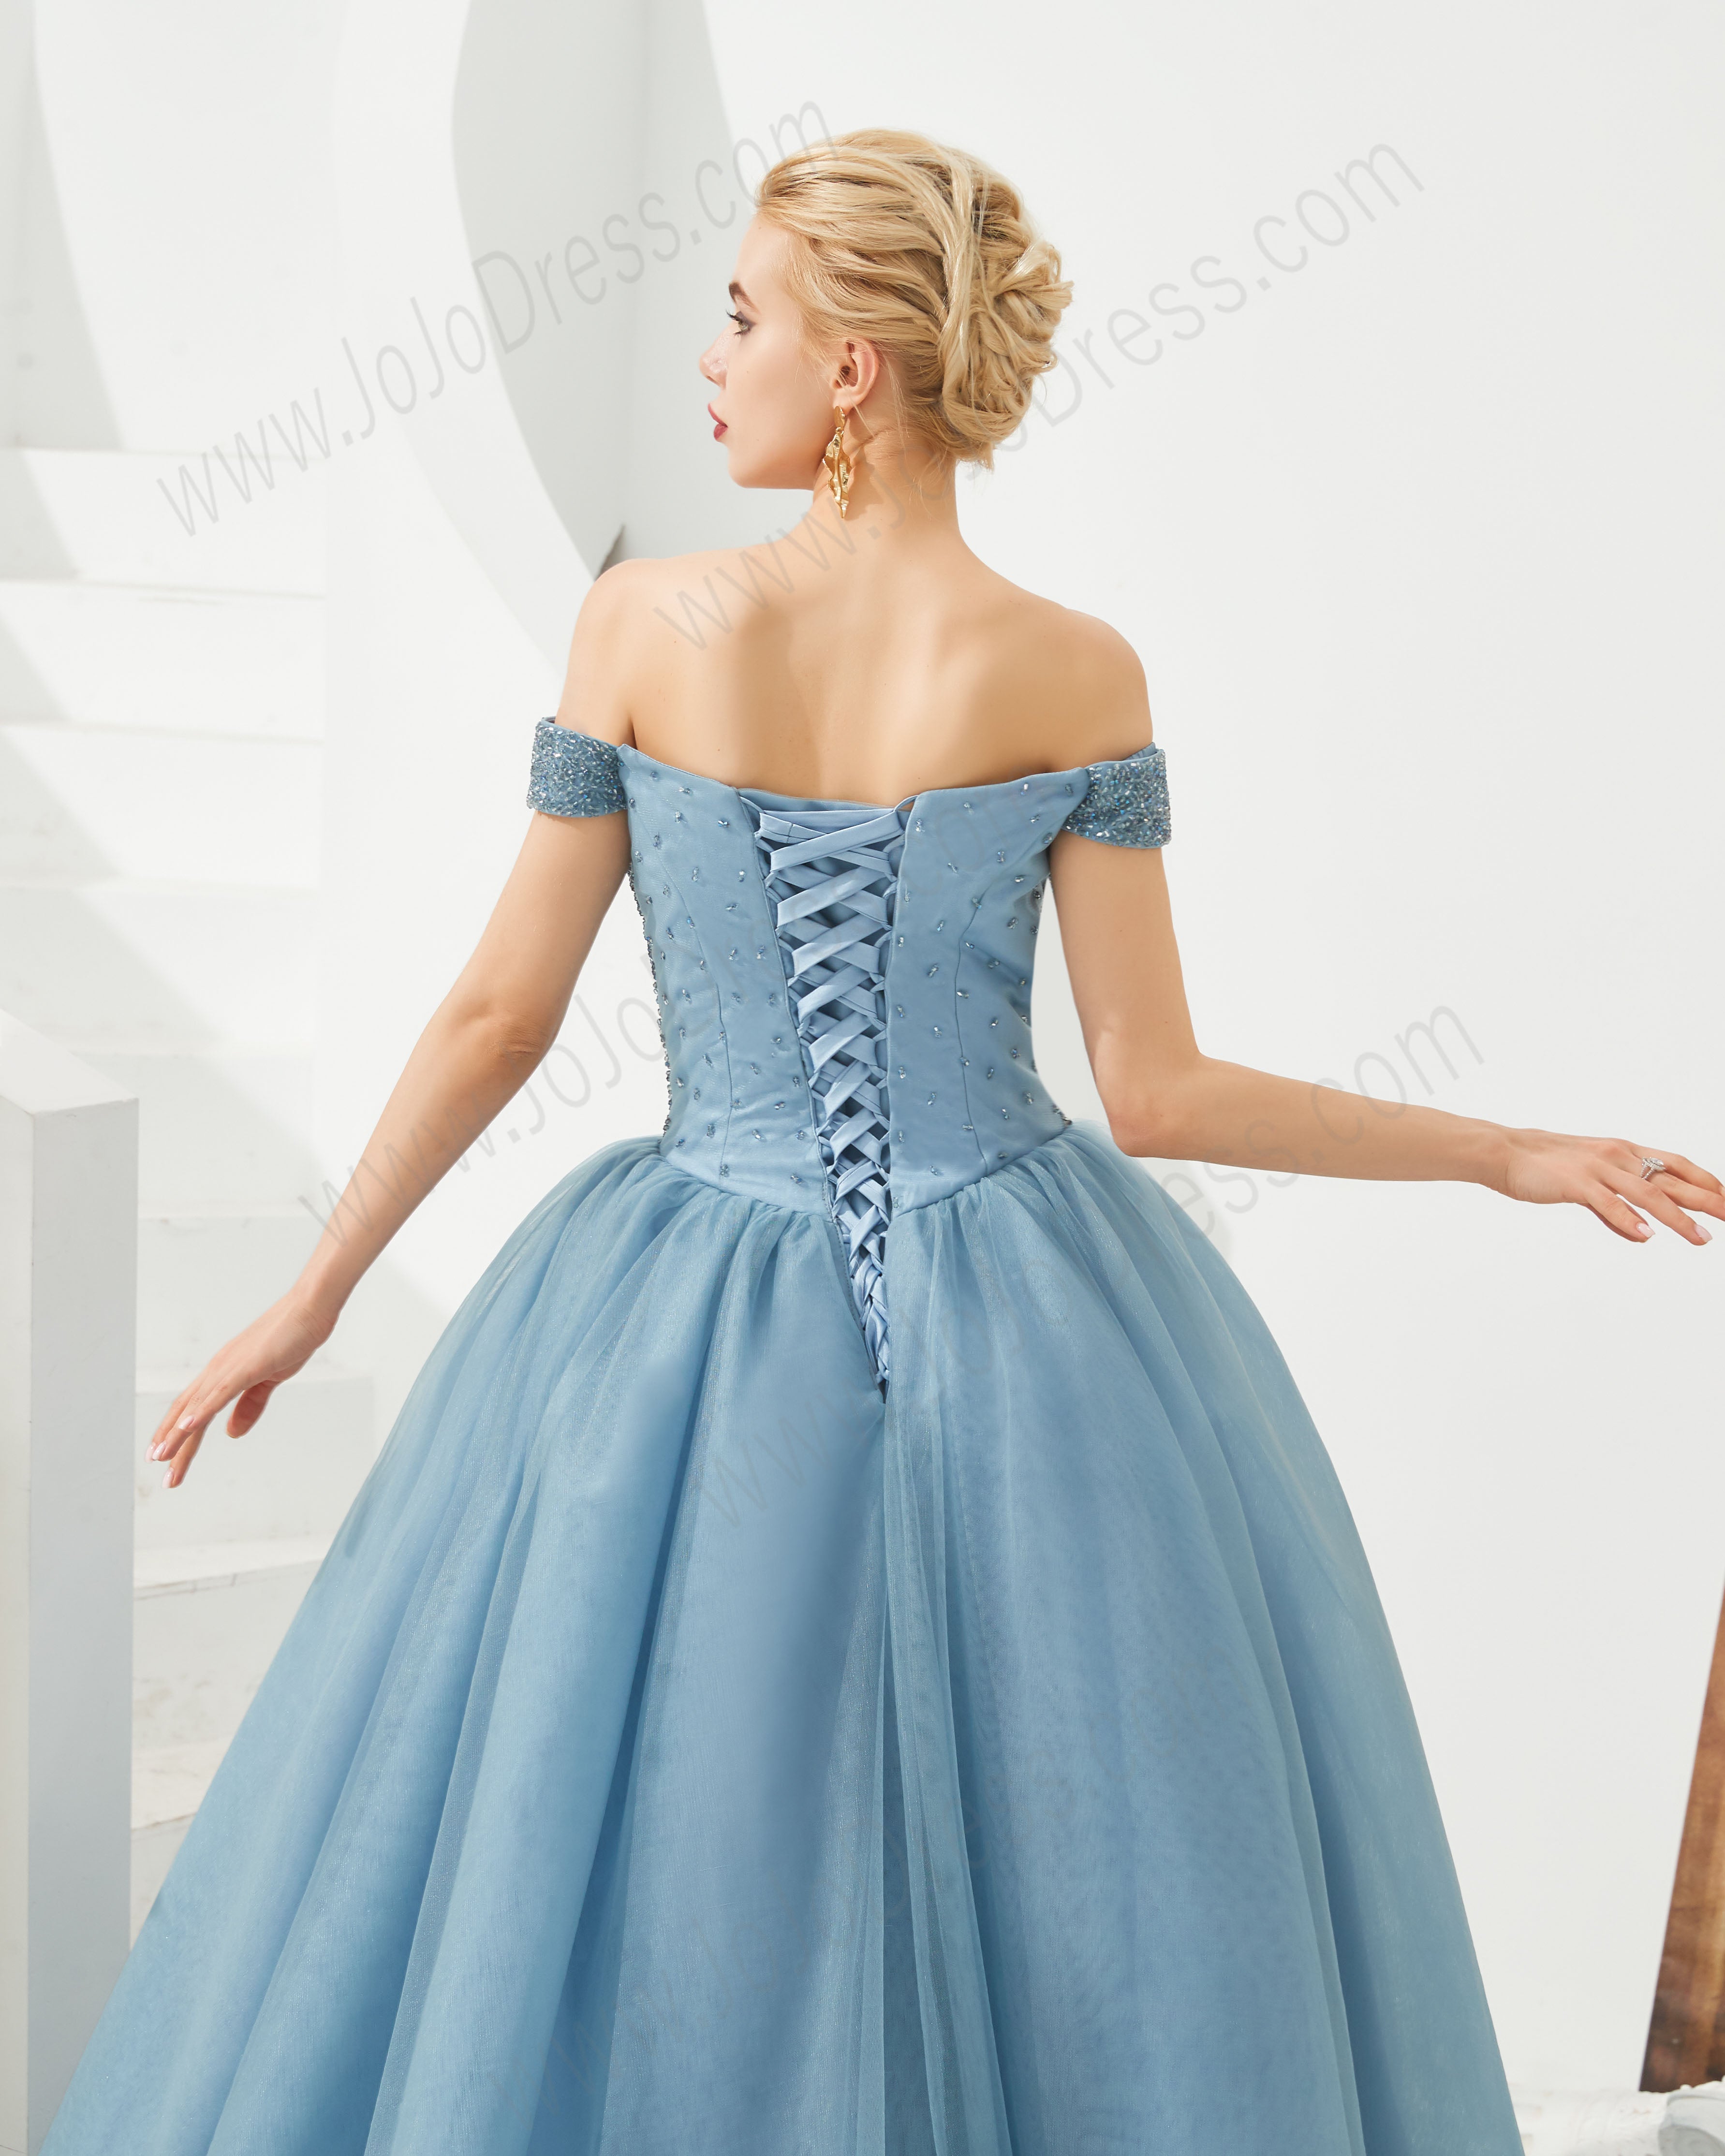 Fairy Light Blue Ball Gown Prom Dress Formal With Off Shoulder Flowers  Wholesale #T69226 - GemGrace.com